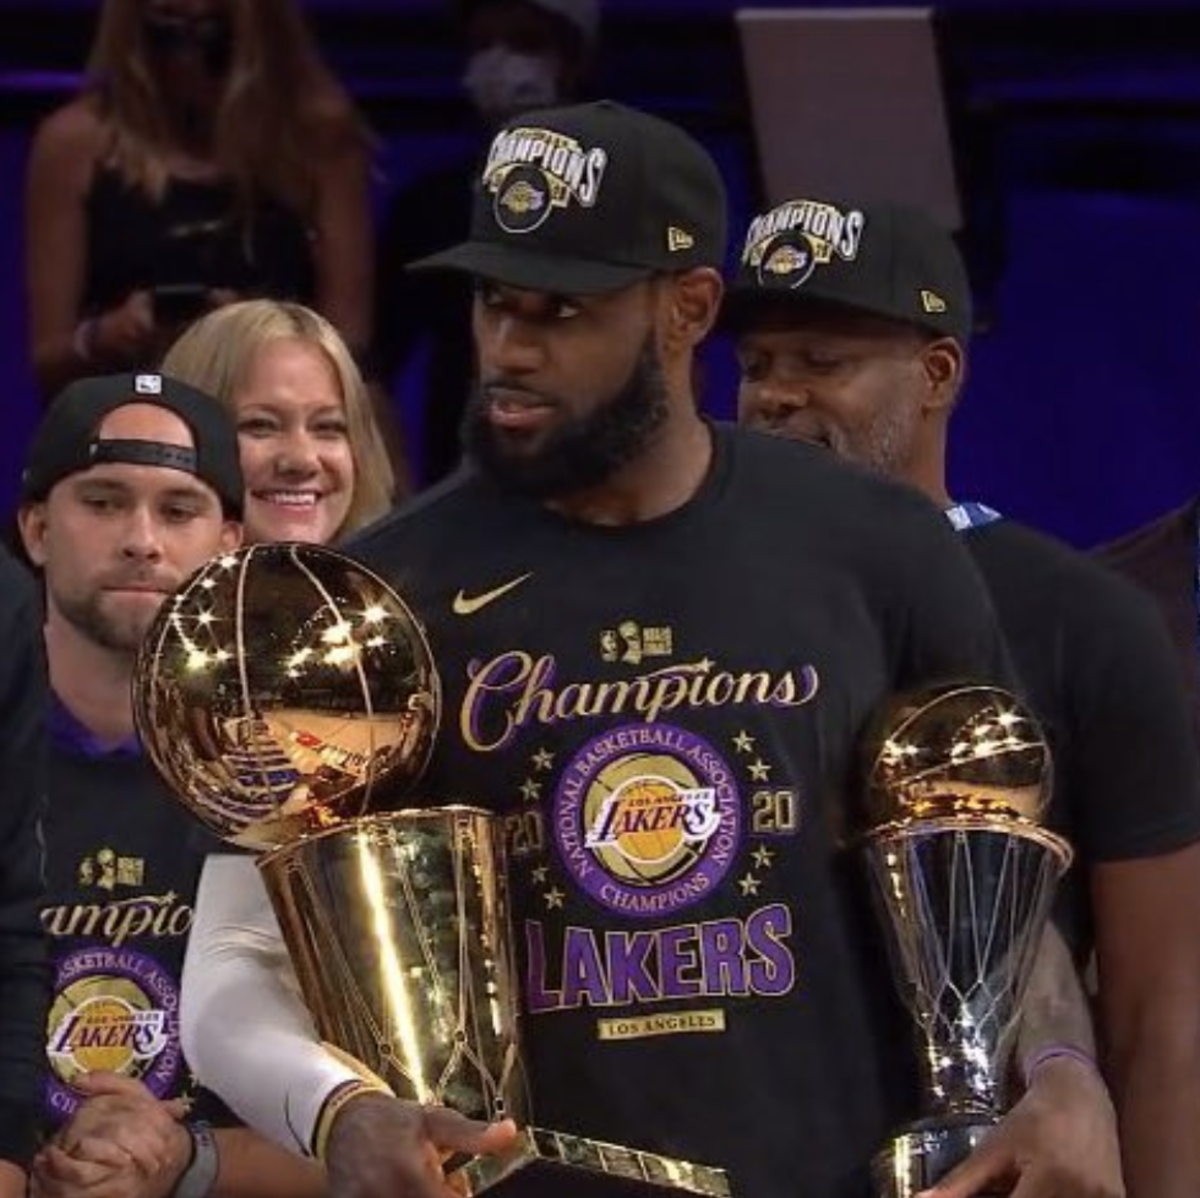 LeBron James Wins Reacts After Winning His Fourth Finals MVP: "I Want My Damn Respect Too."